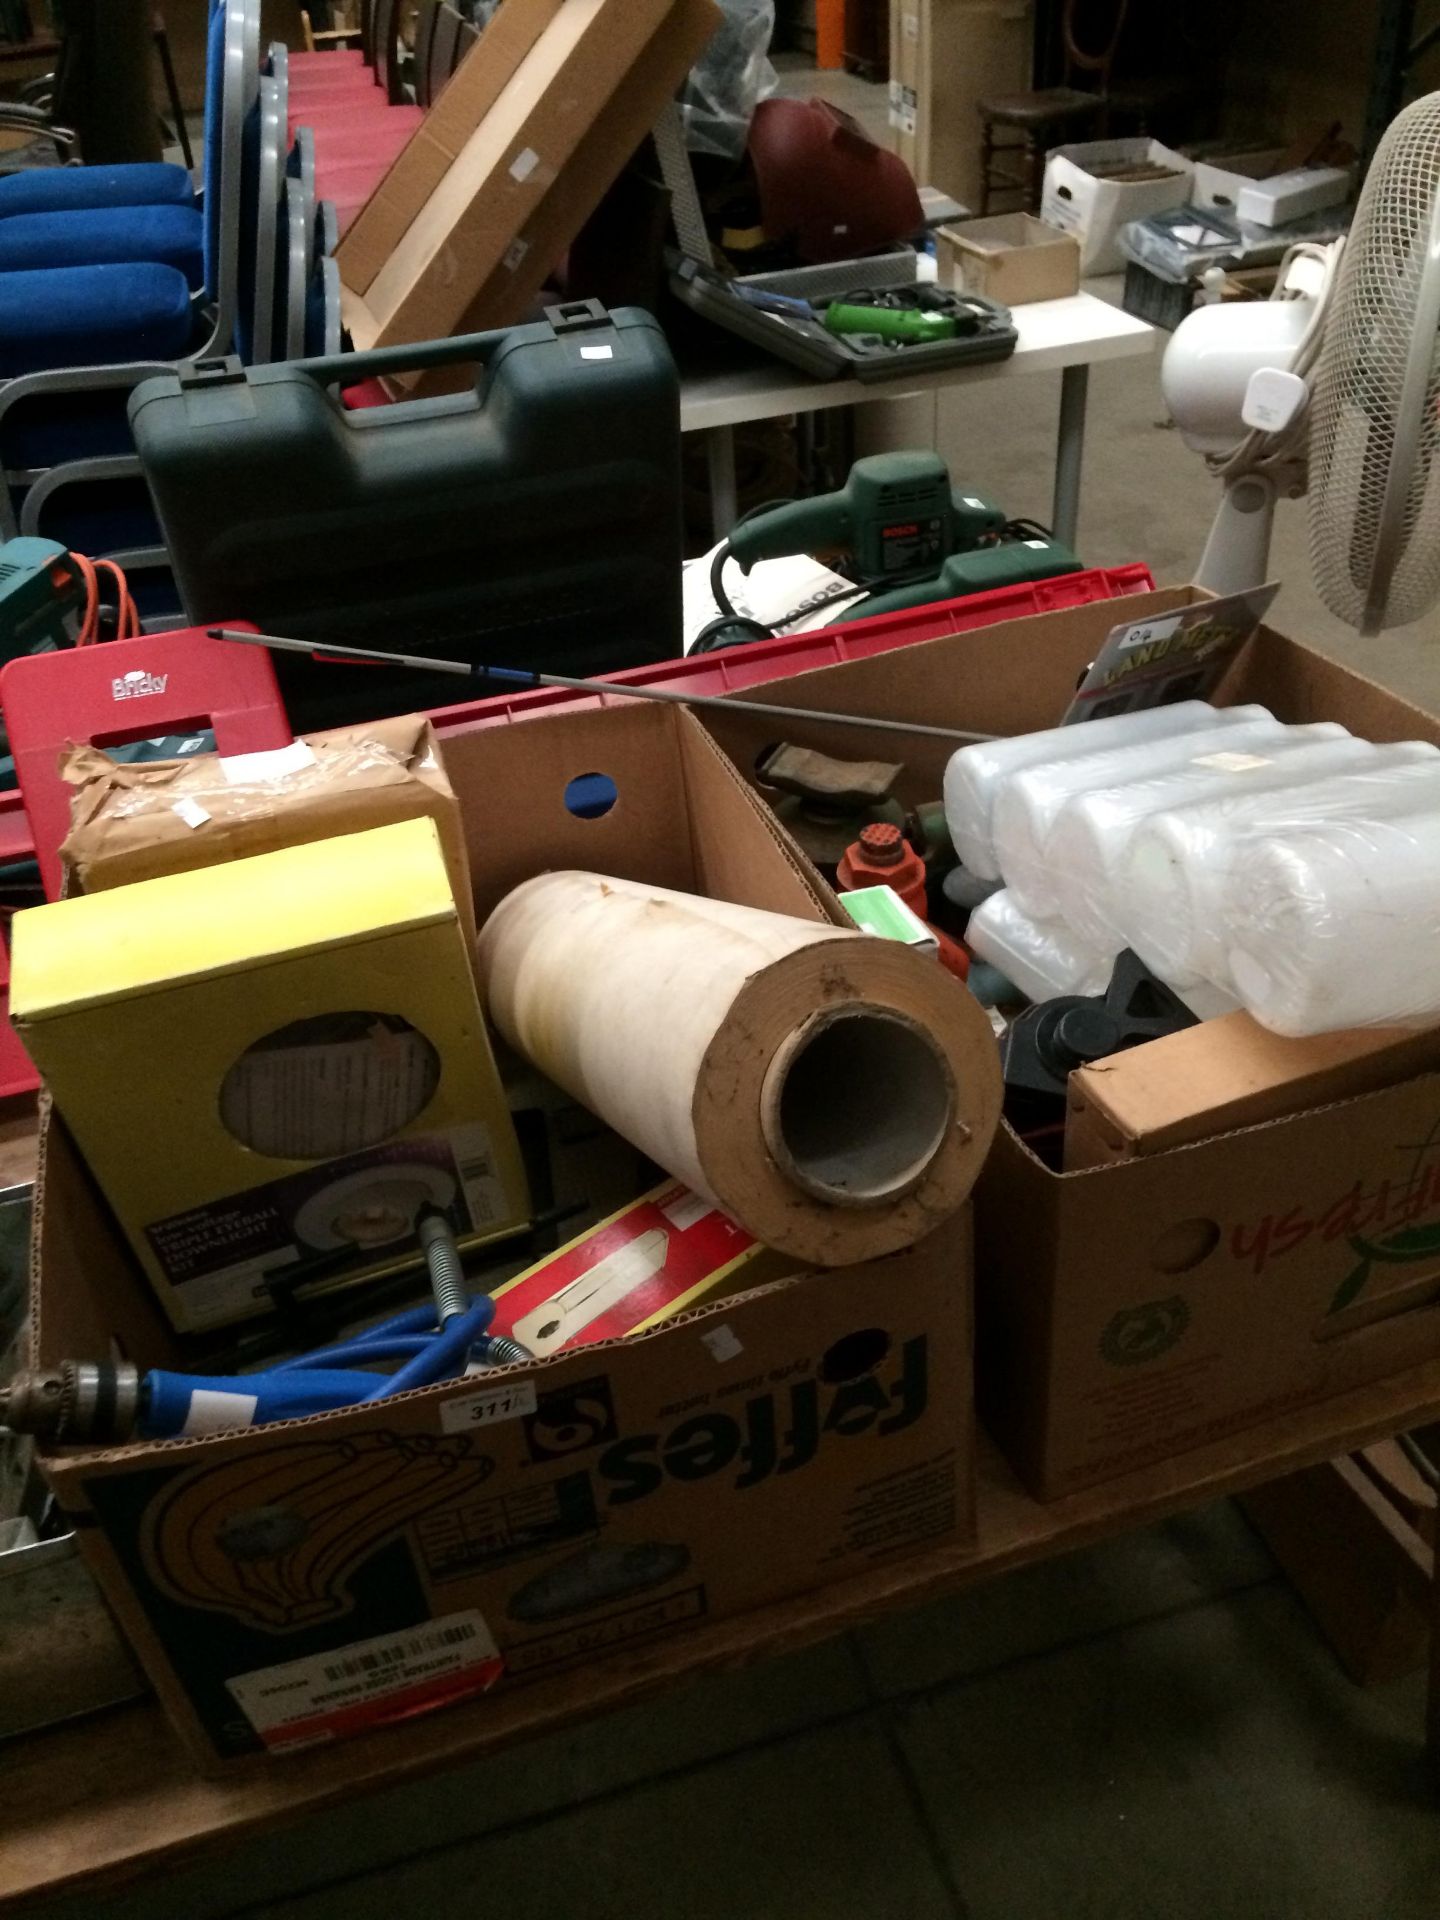 Contents to two boxes - saws, bottle jacks, adaptors, a Bricky plastic level, lights,